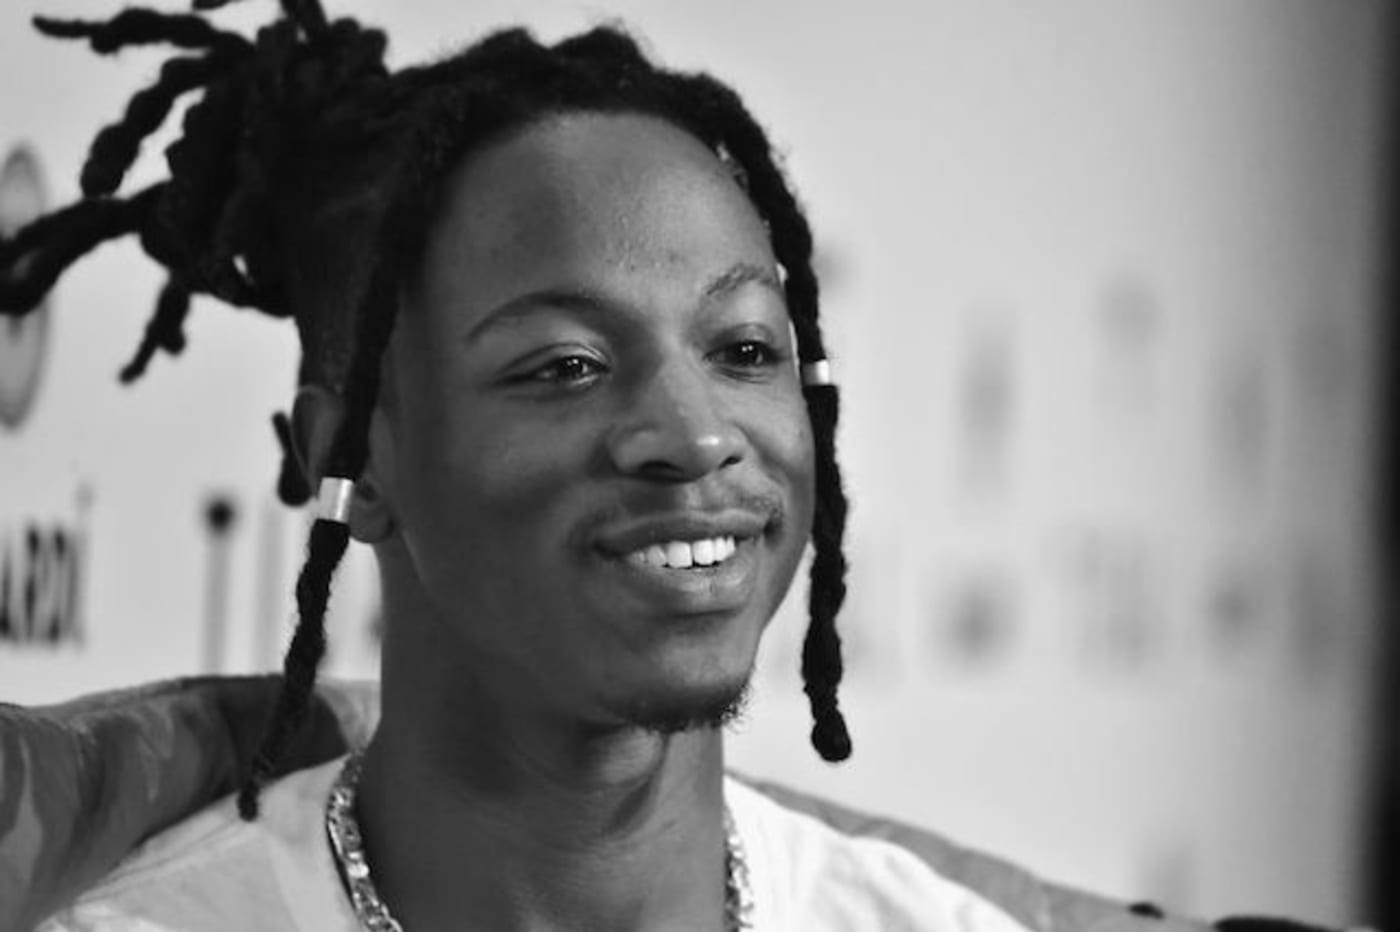 This is a picture of Joey Badass.